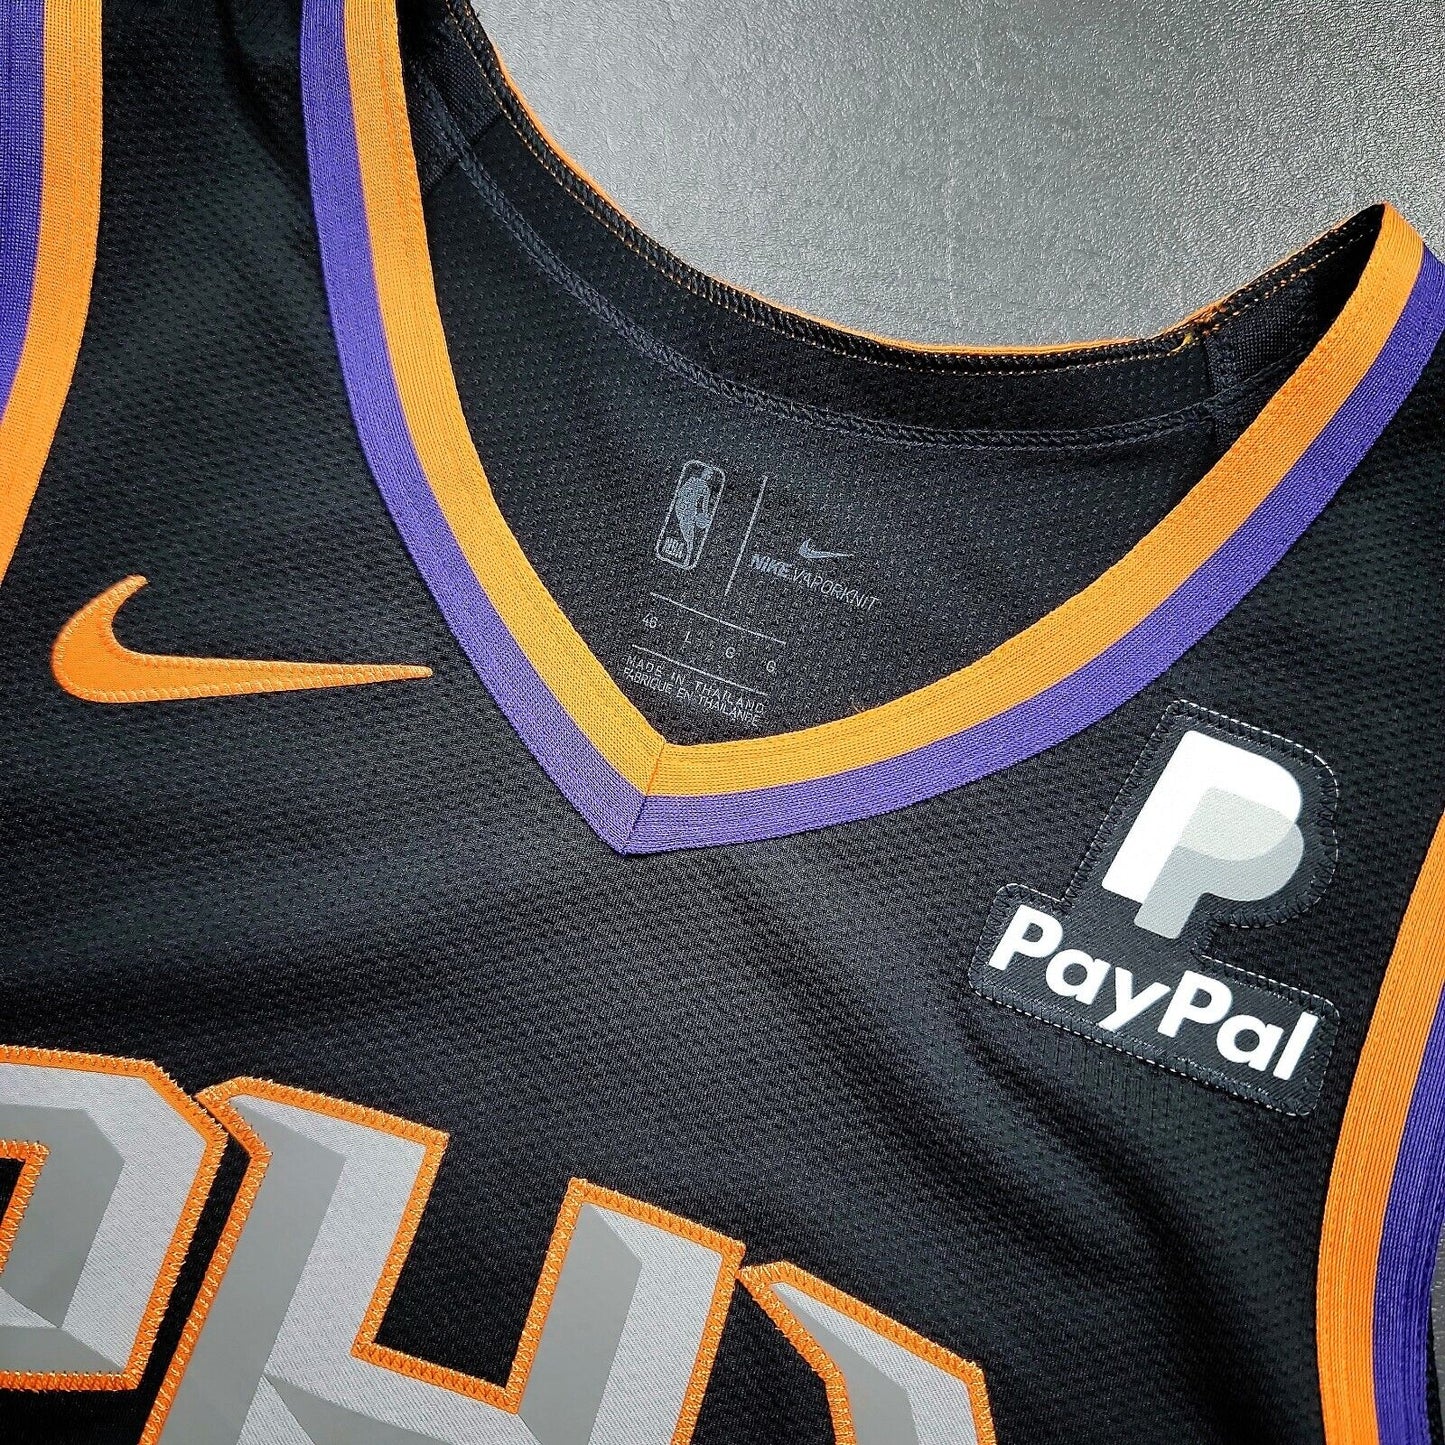 100% Authentic Devin Booker Nike 2019 Phoenix Suns Team Issued Pro Jersey 46+6"